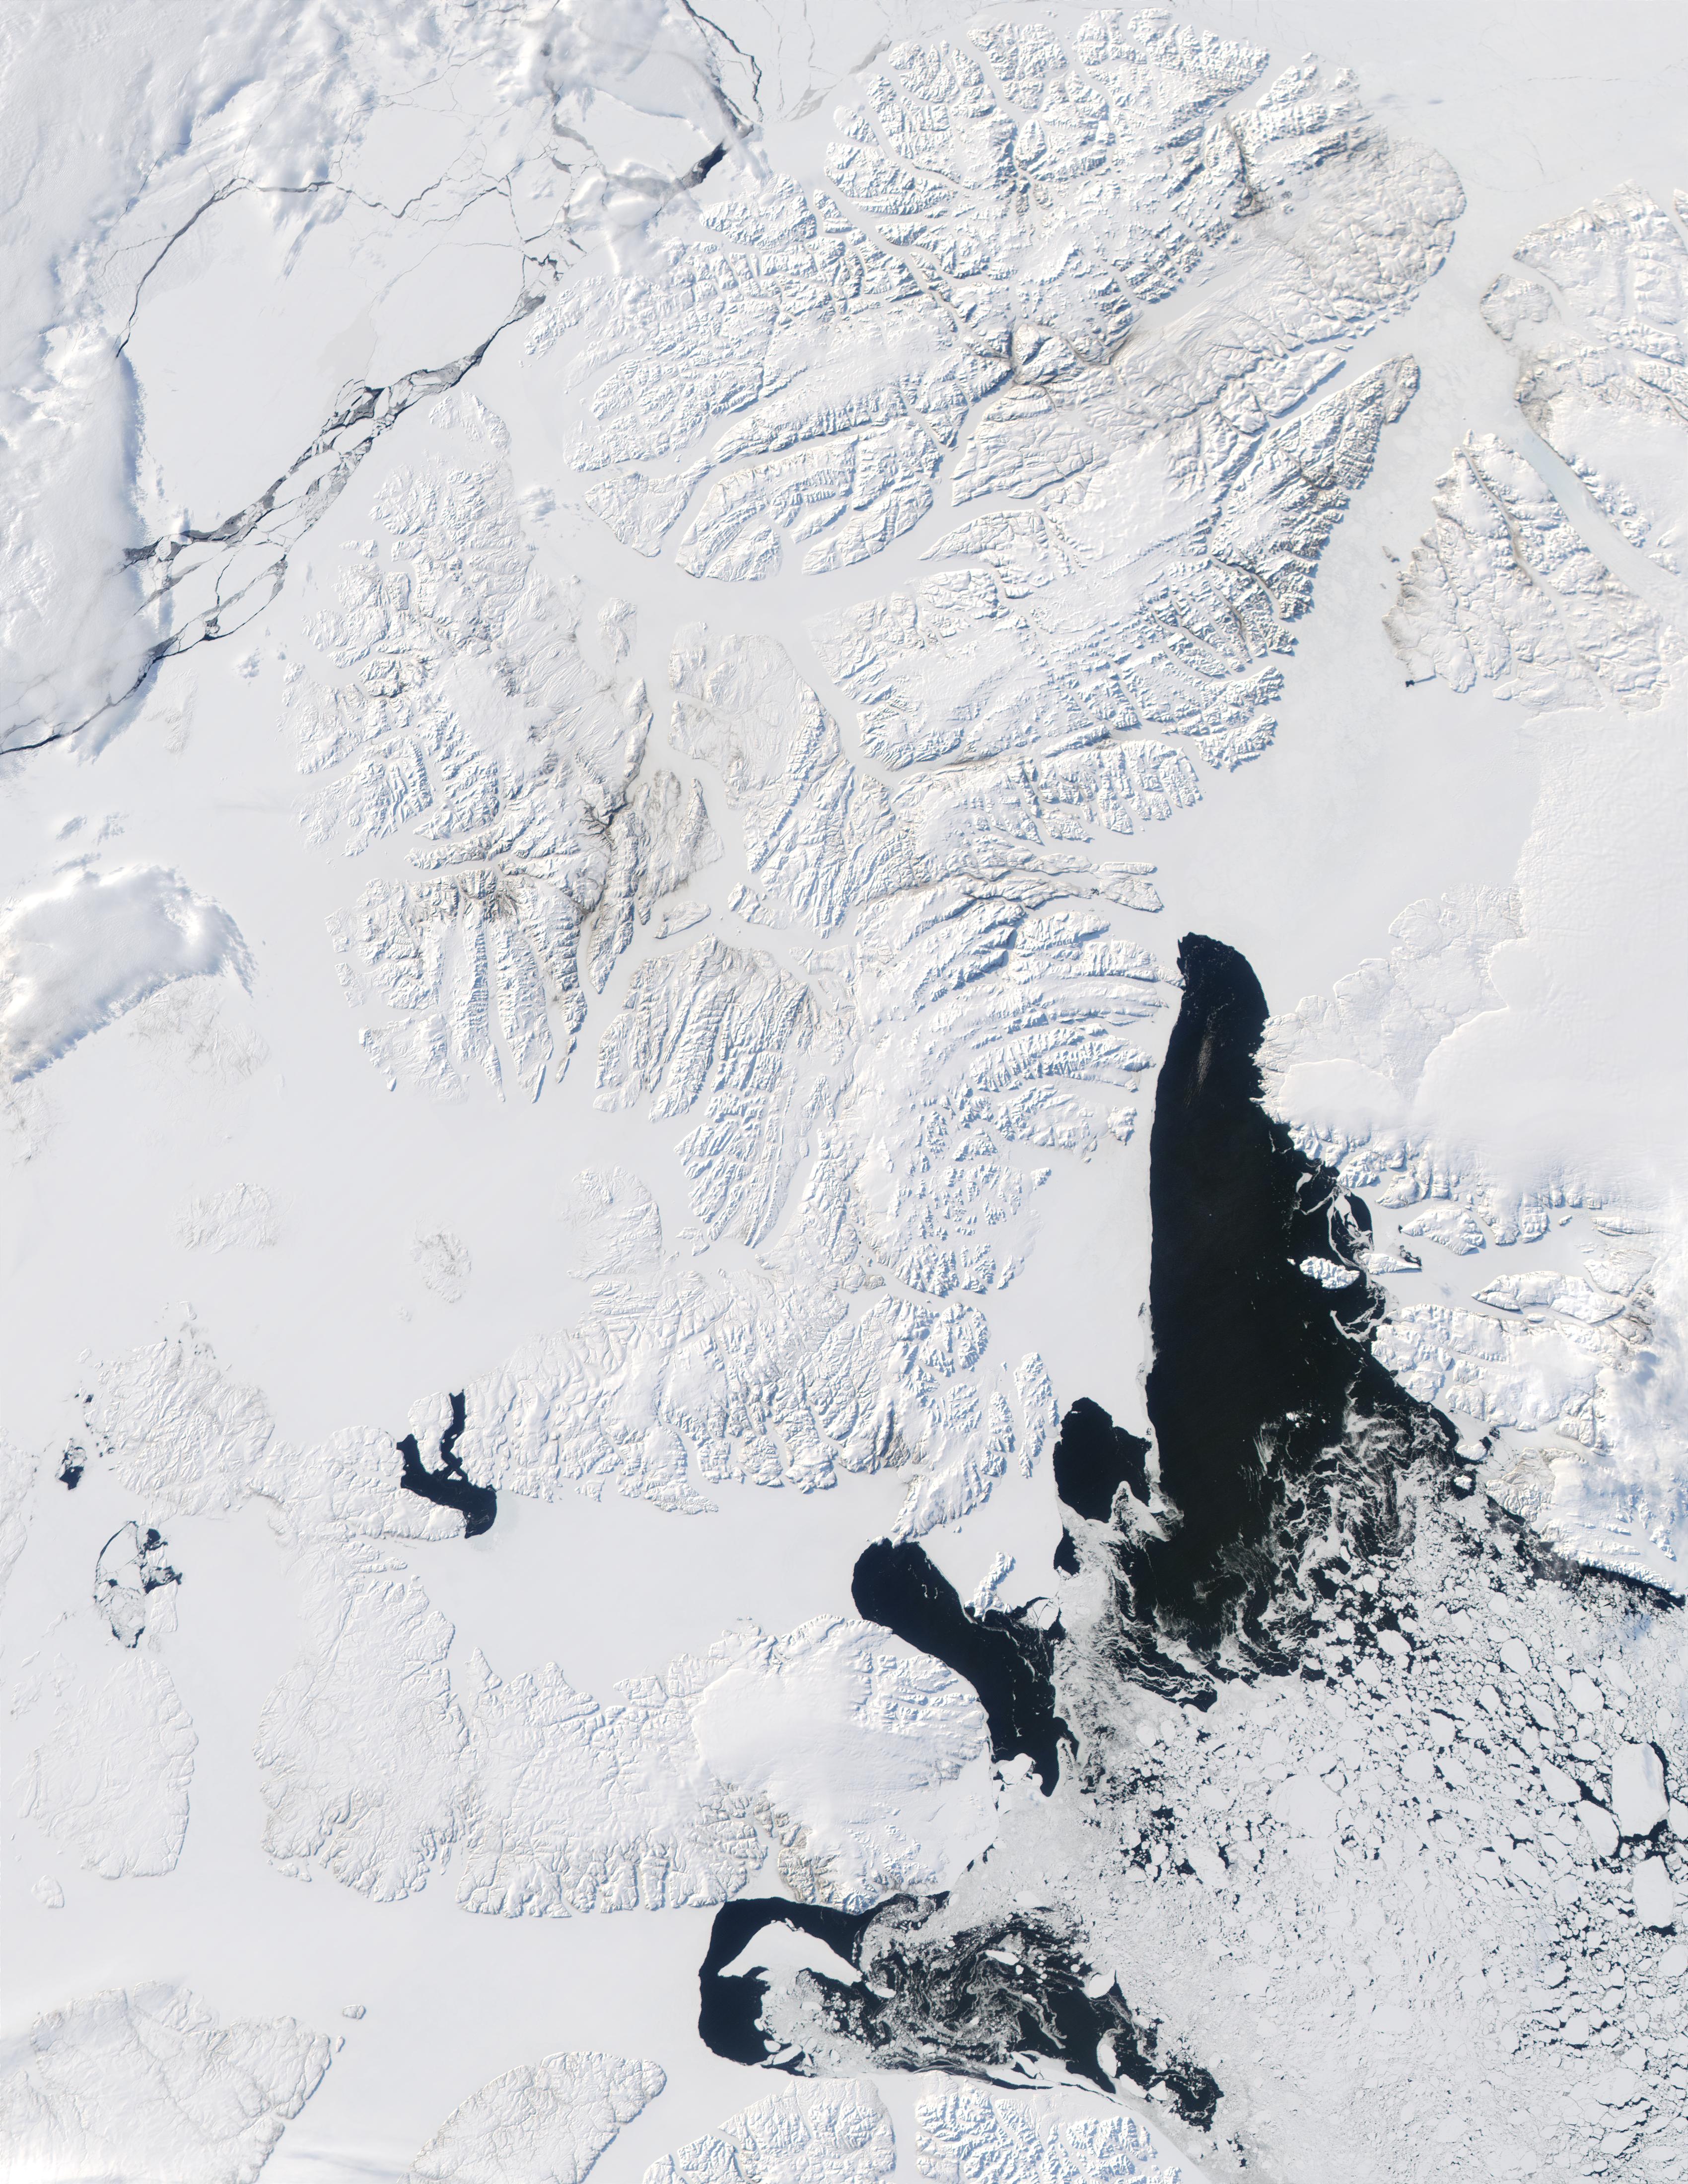 Queen Elizabeth Islands and Baffin Bay, Northern Canada - related image preview